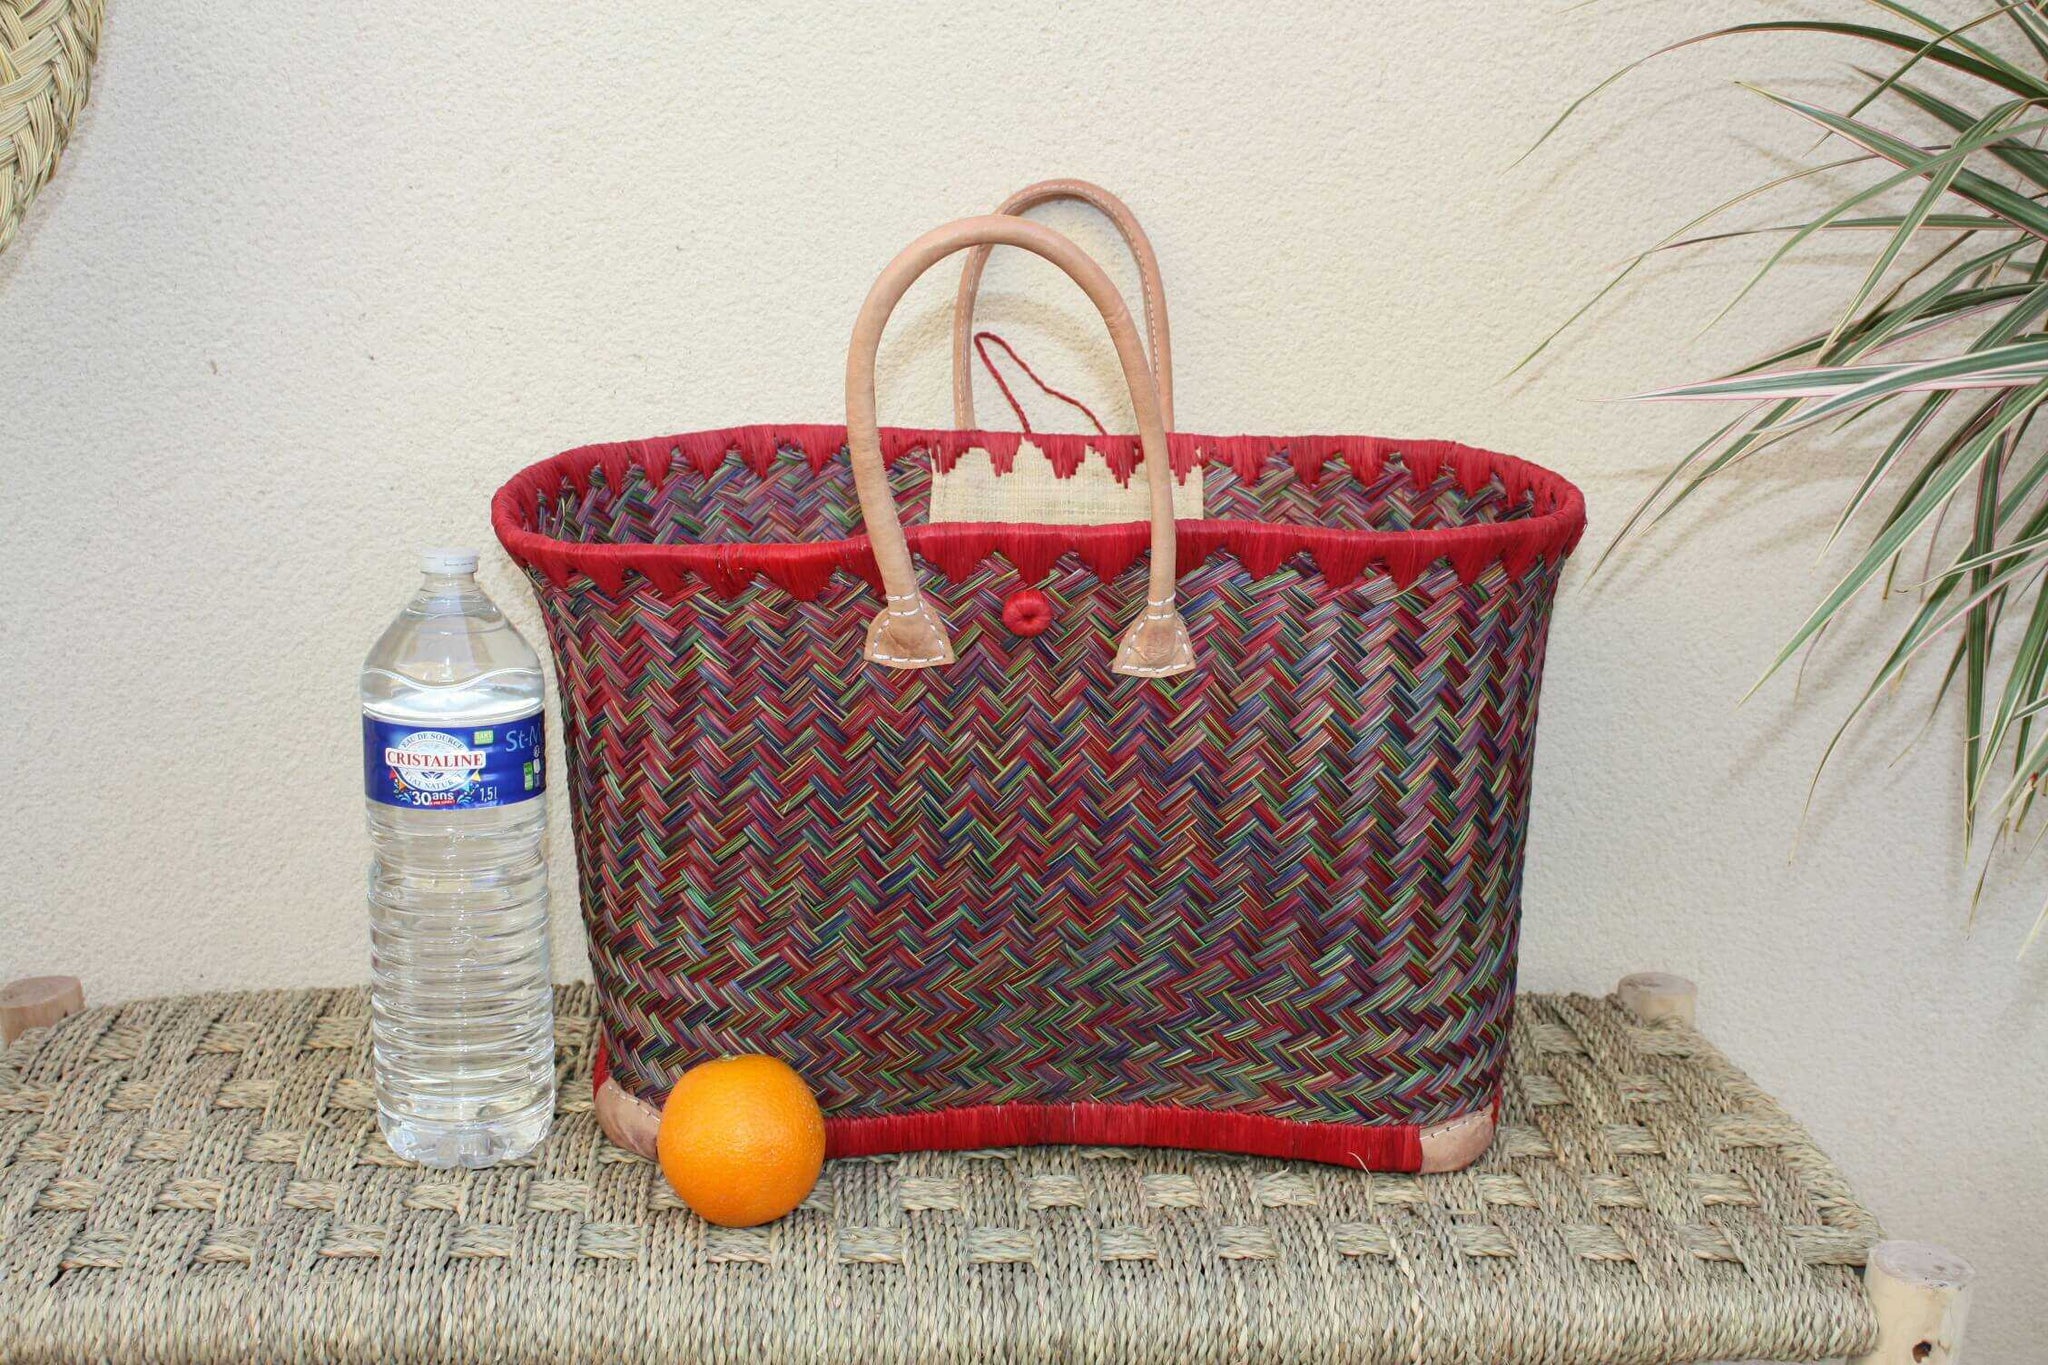 Superb Basket tote bag - 3 SIZES - hand-woven - ideal shopping, markets, work, beach, decoration...